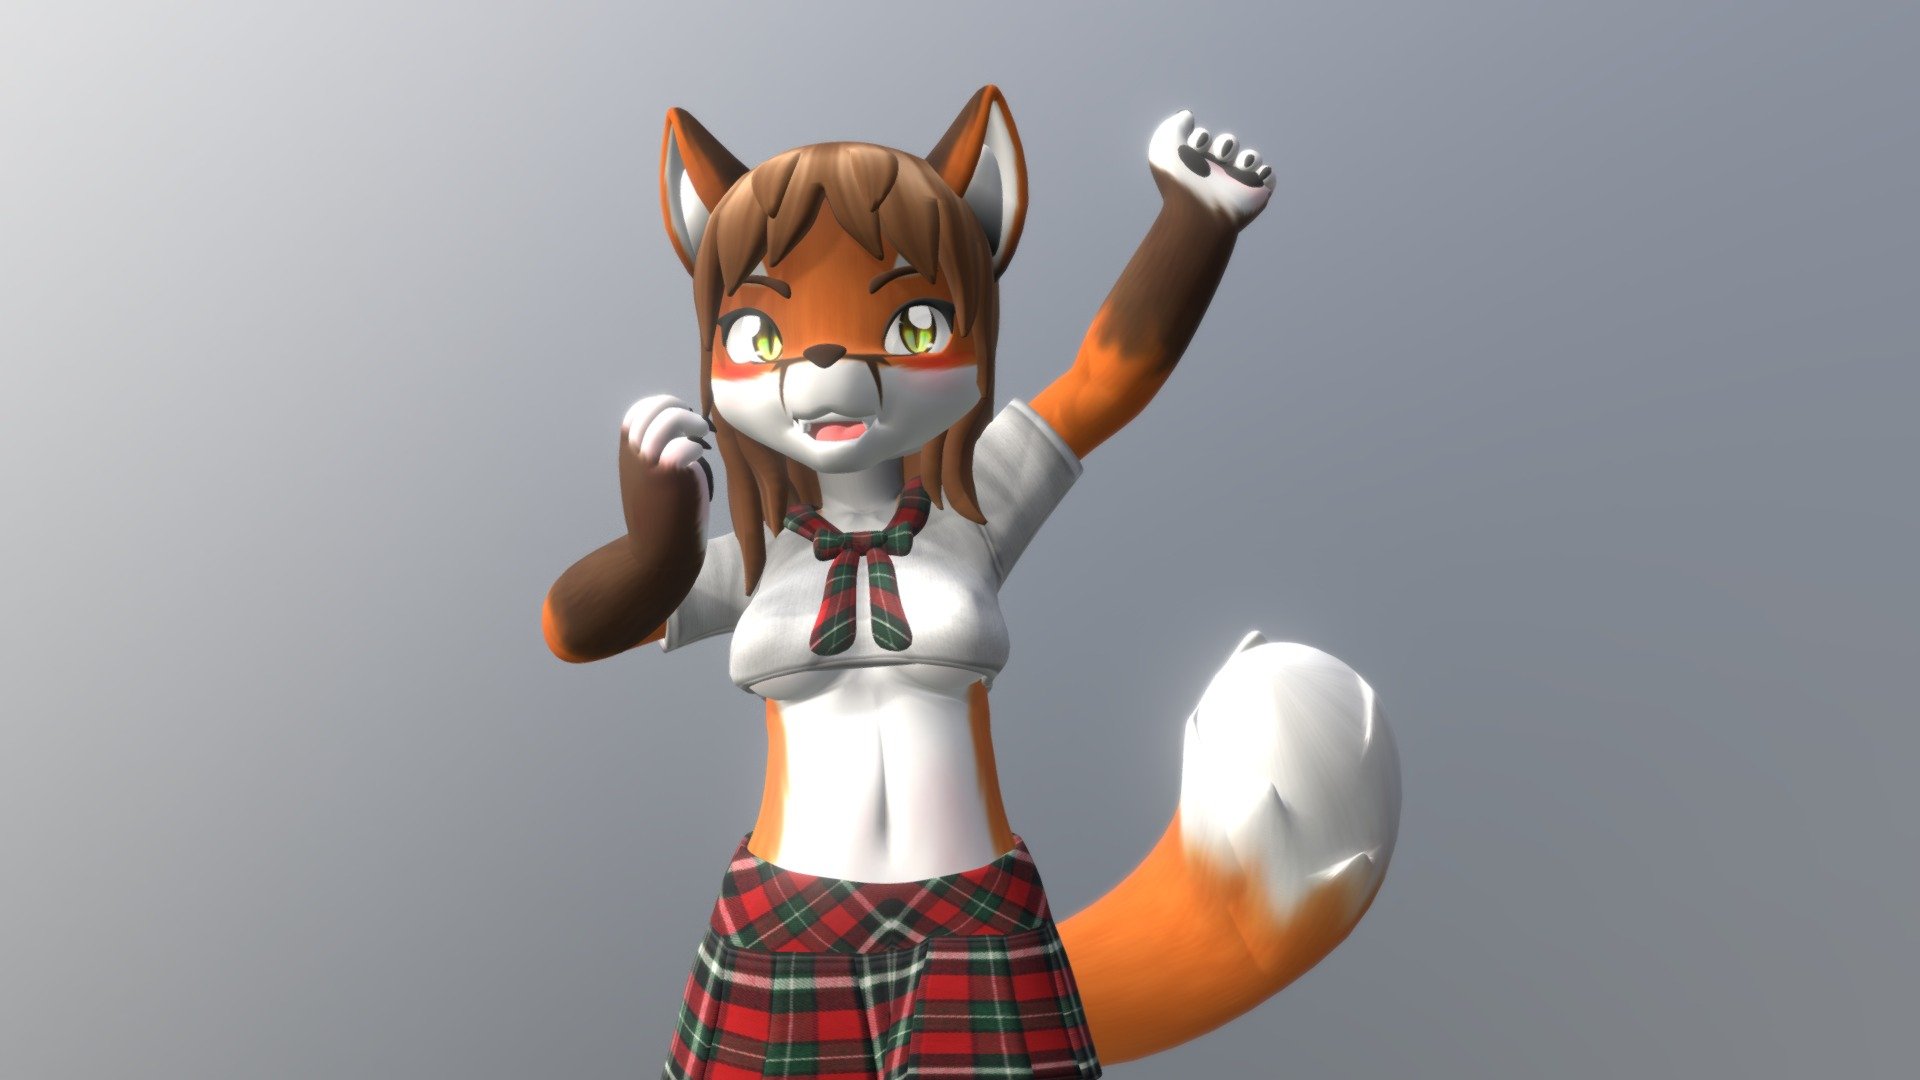 Comission to @Yeng_Ping.
Commissions: https://www.furaffinity.net/commissions/hickysnow/ - Julia Aries - 3D model by HickySnow (@Hicky_Snow) 3d model